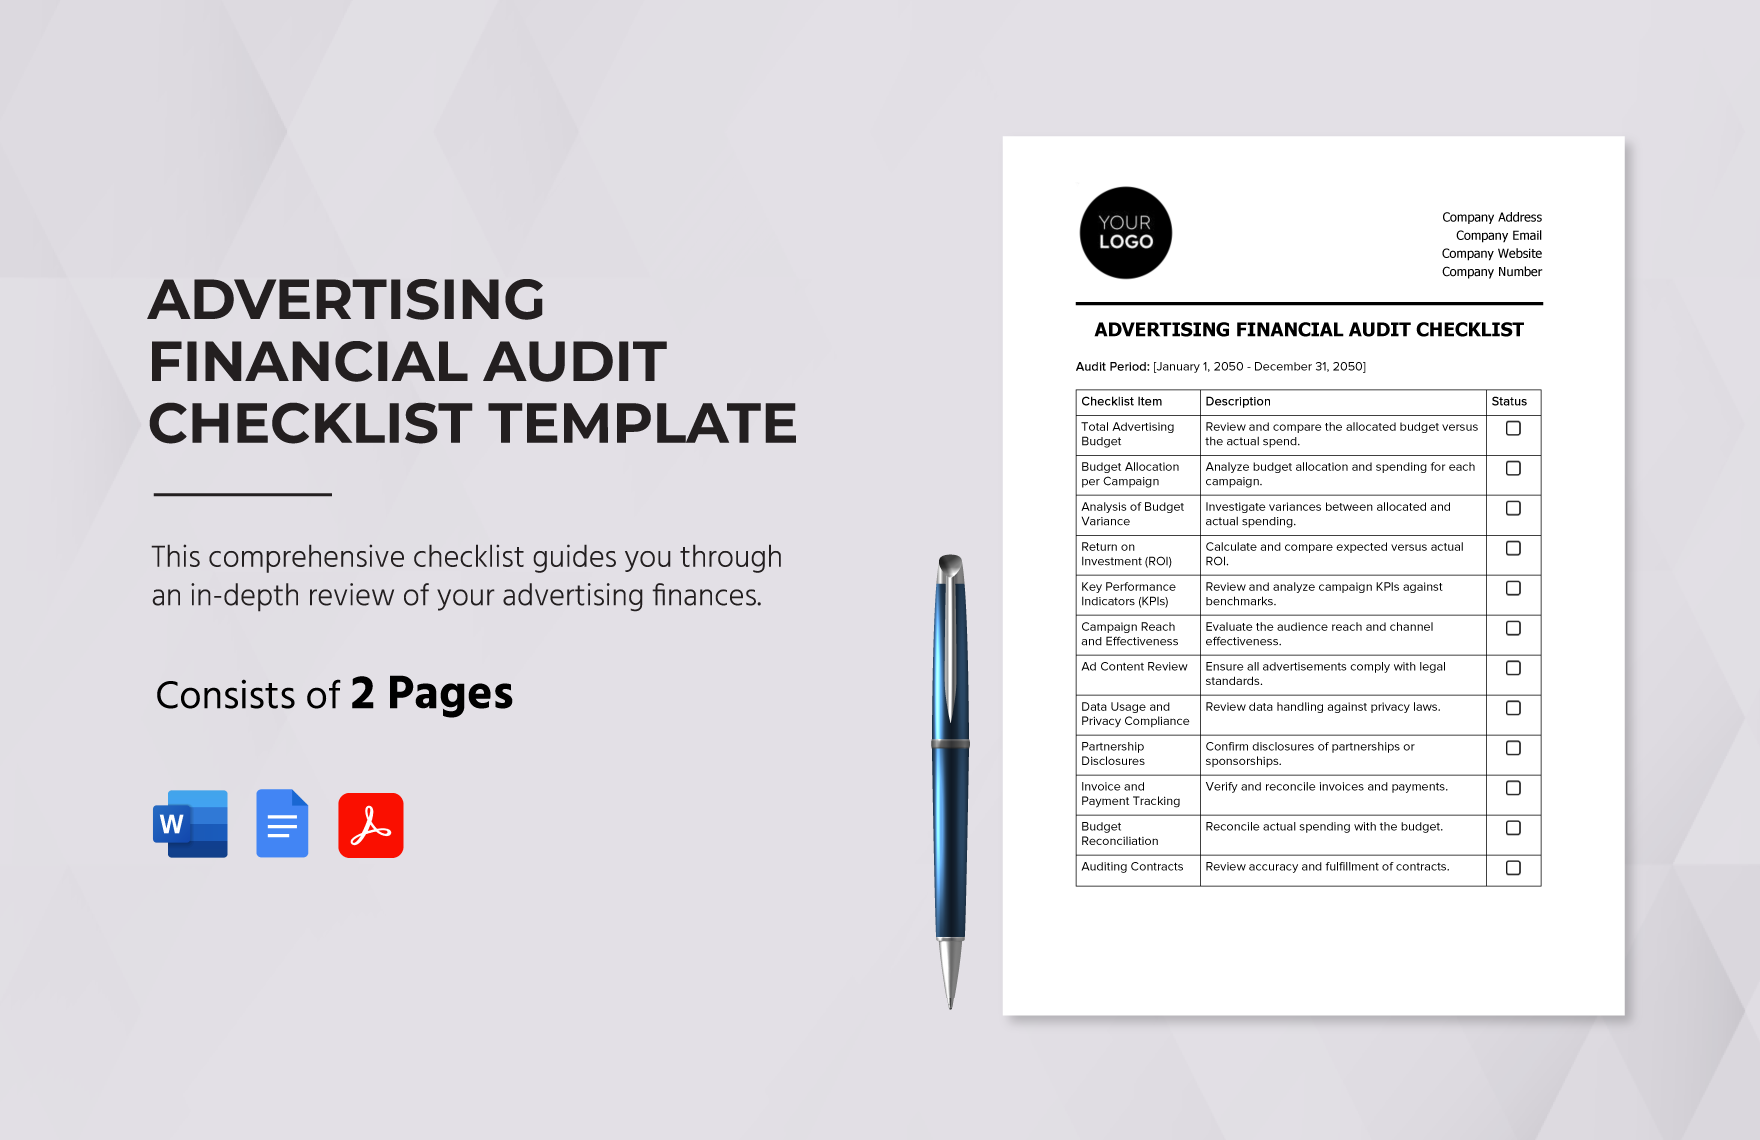 Advertising Financial Audit Checklist Template in Word, Google Docs, PDF